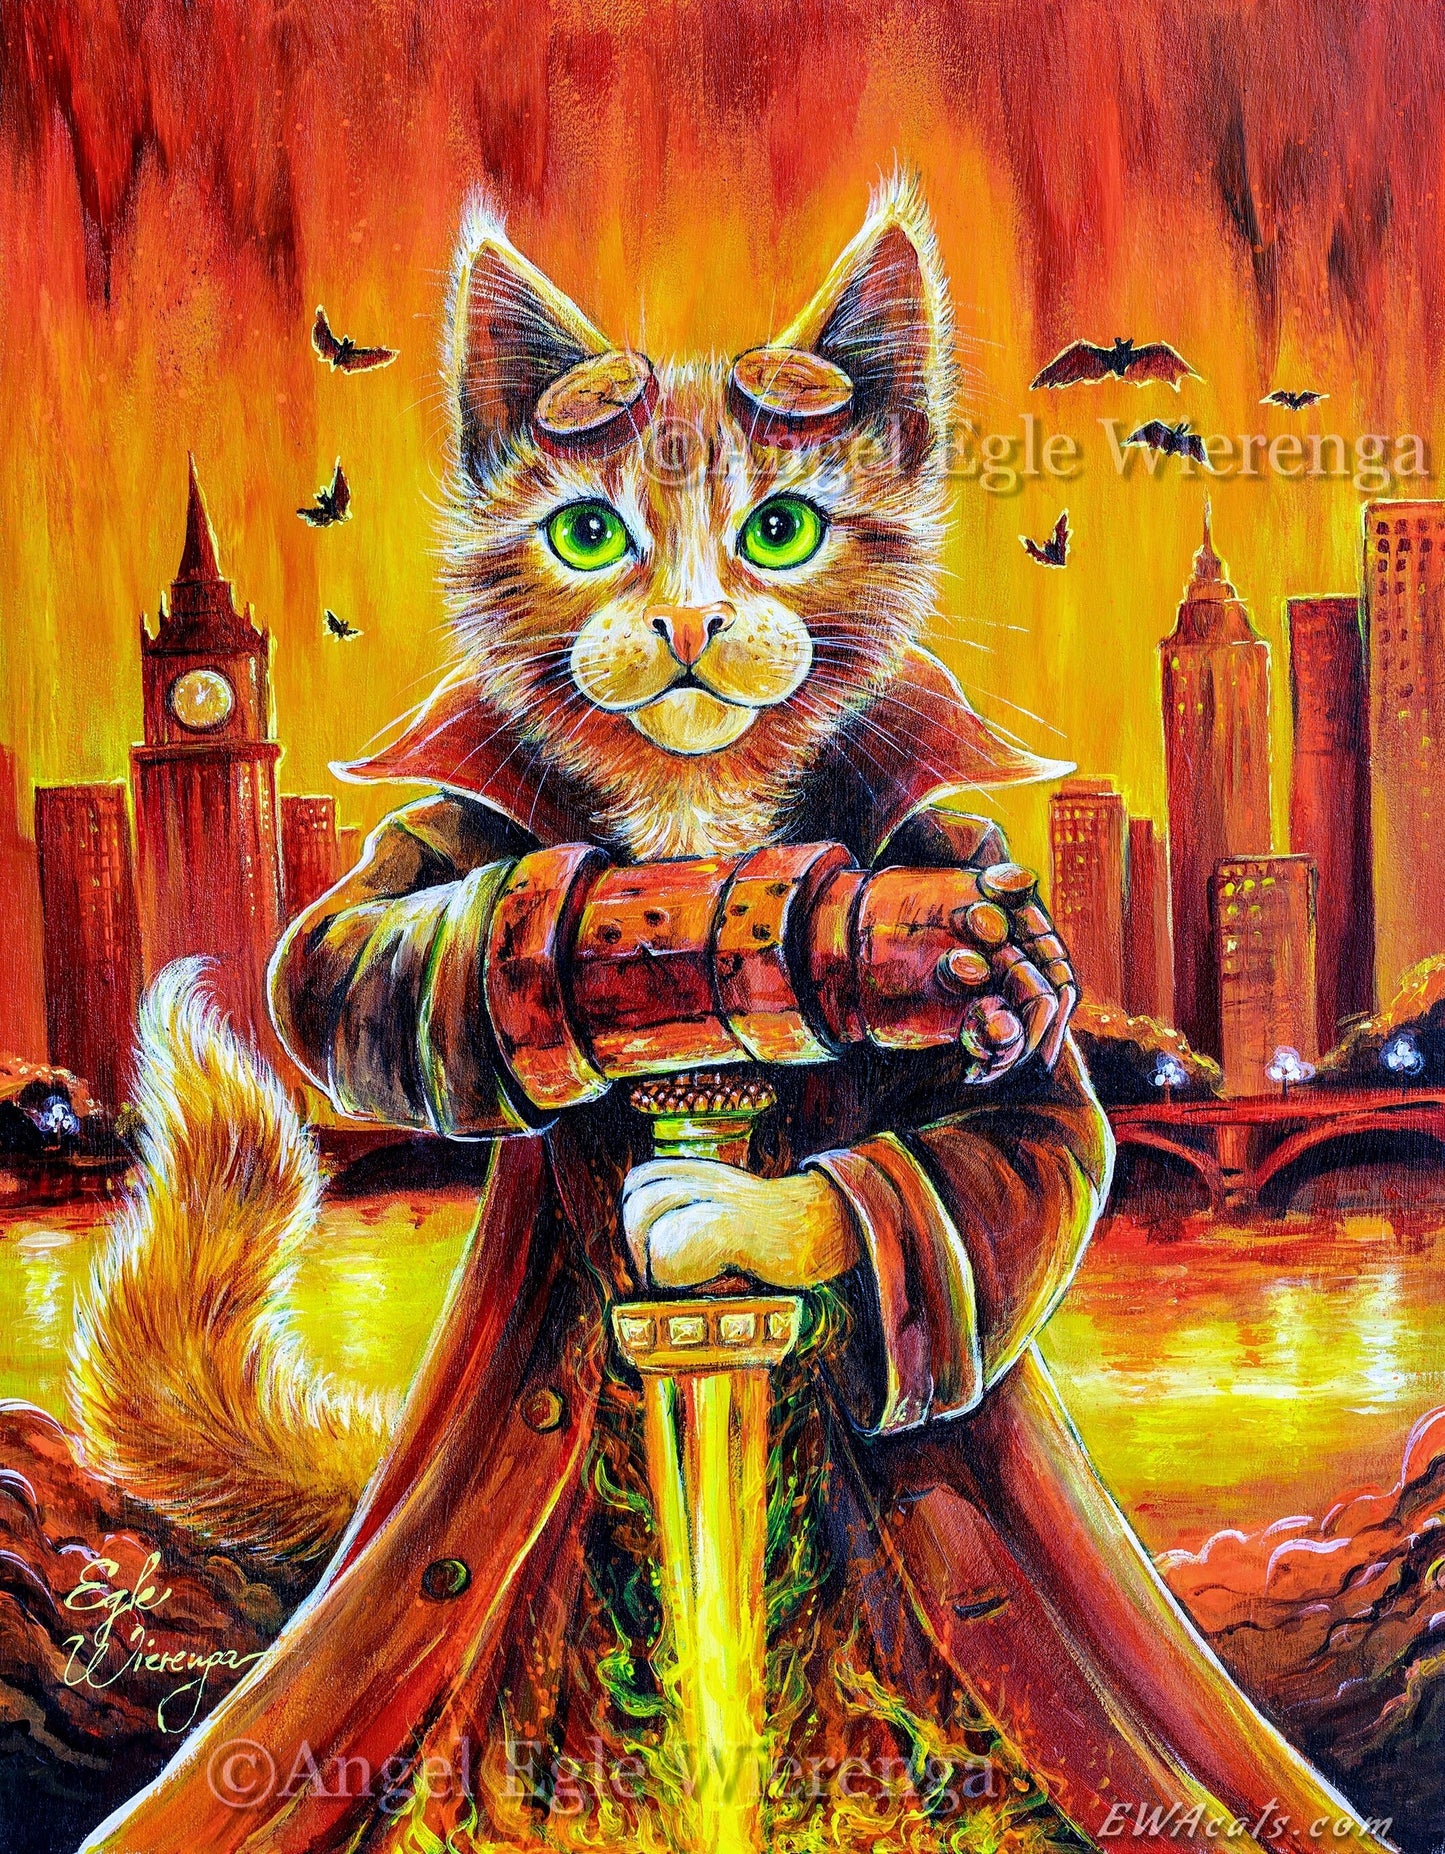 CANVAS "Hellboy Kitty" Open & Limited Edition